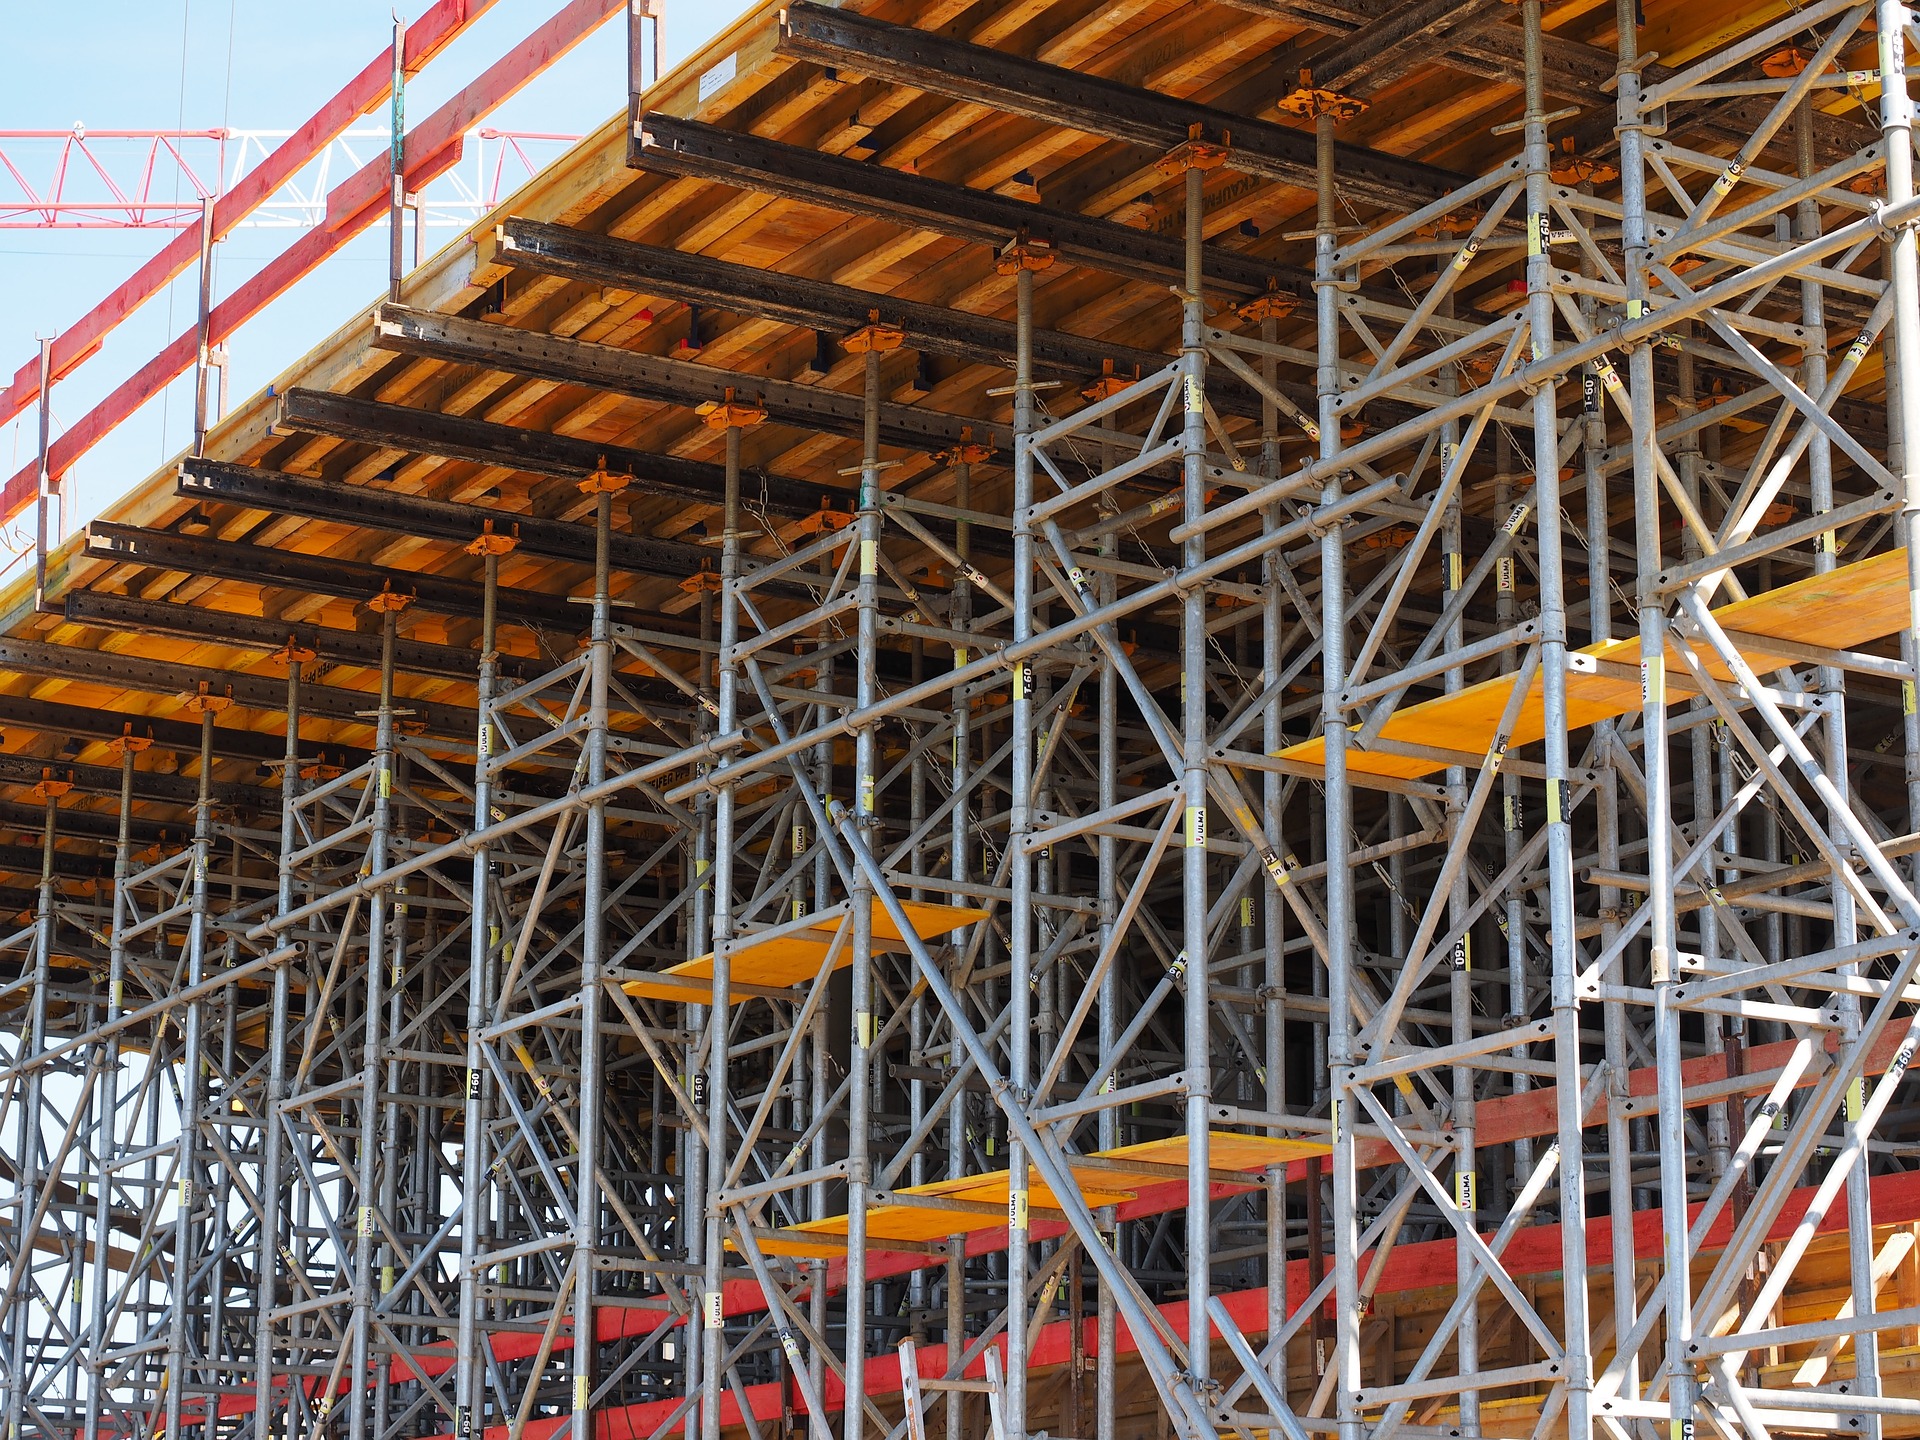 lots of scaffolding up at a construction site, hiring a scaffolding company benefits